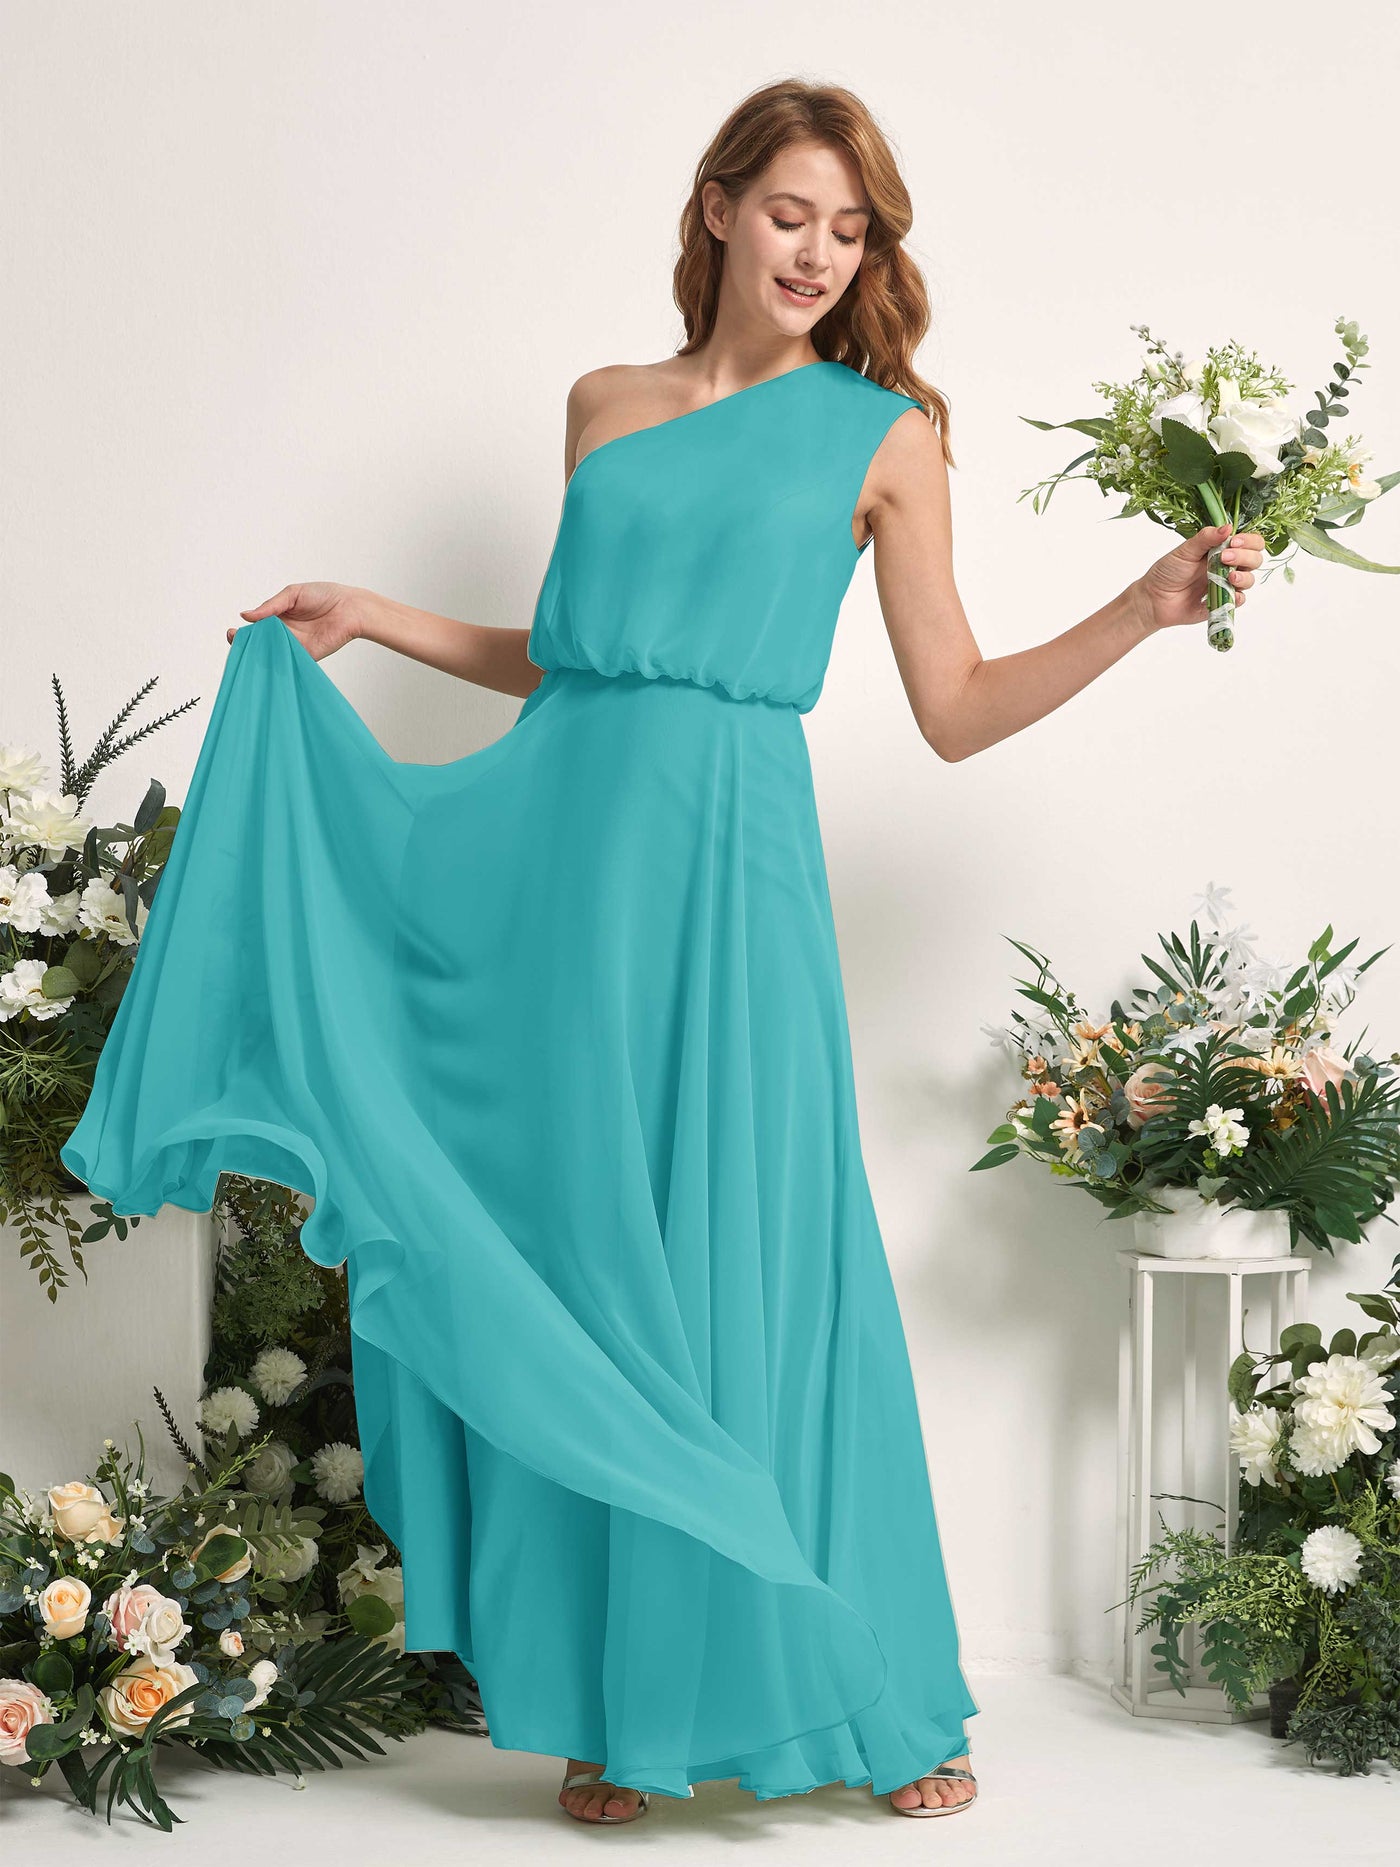 Bridesmaid Dress A-line Chiffon One Shoulder Full Length Sleeveless Wedding Party Dress - Turquoise (81226823)#color_turquoise